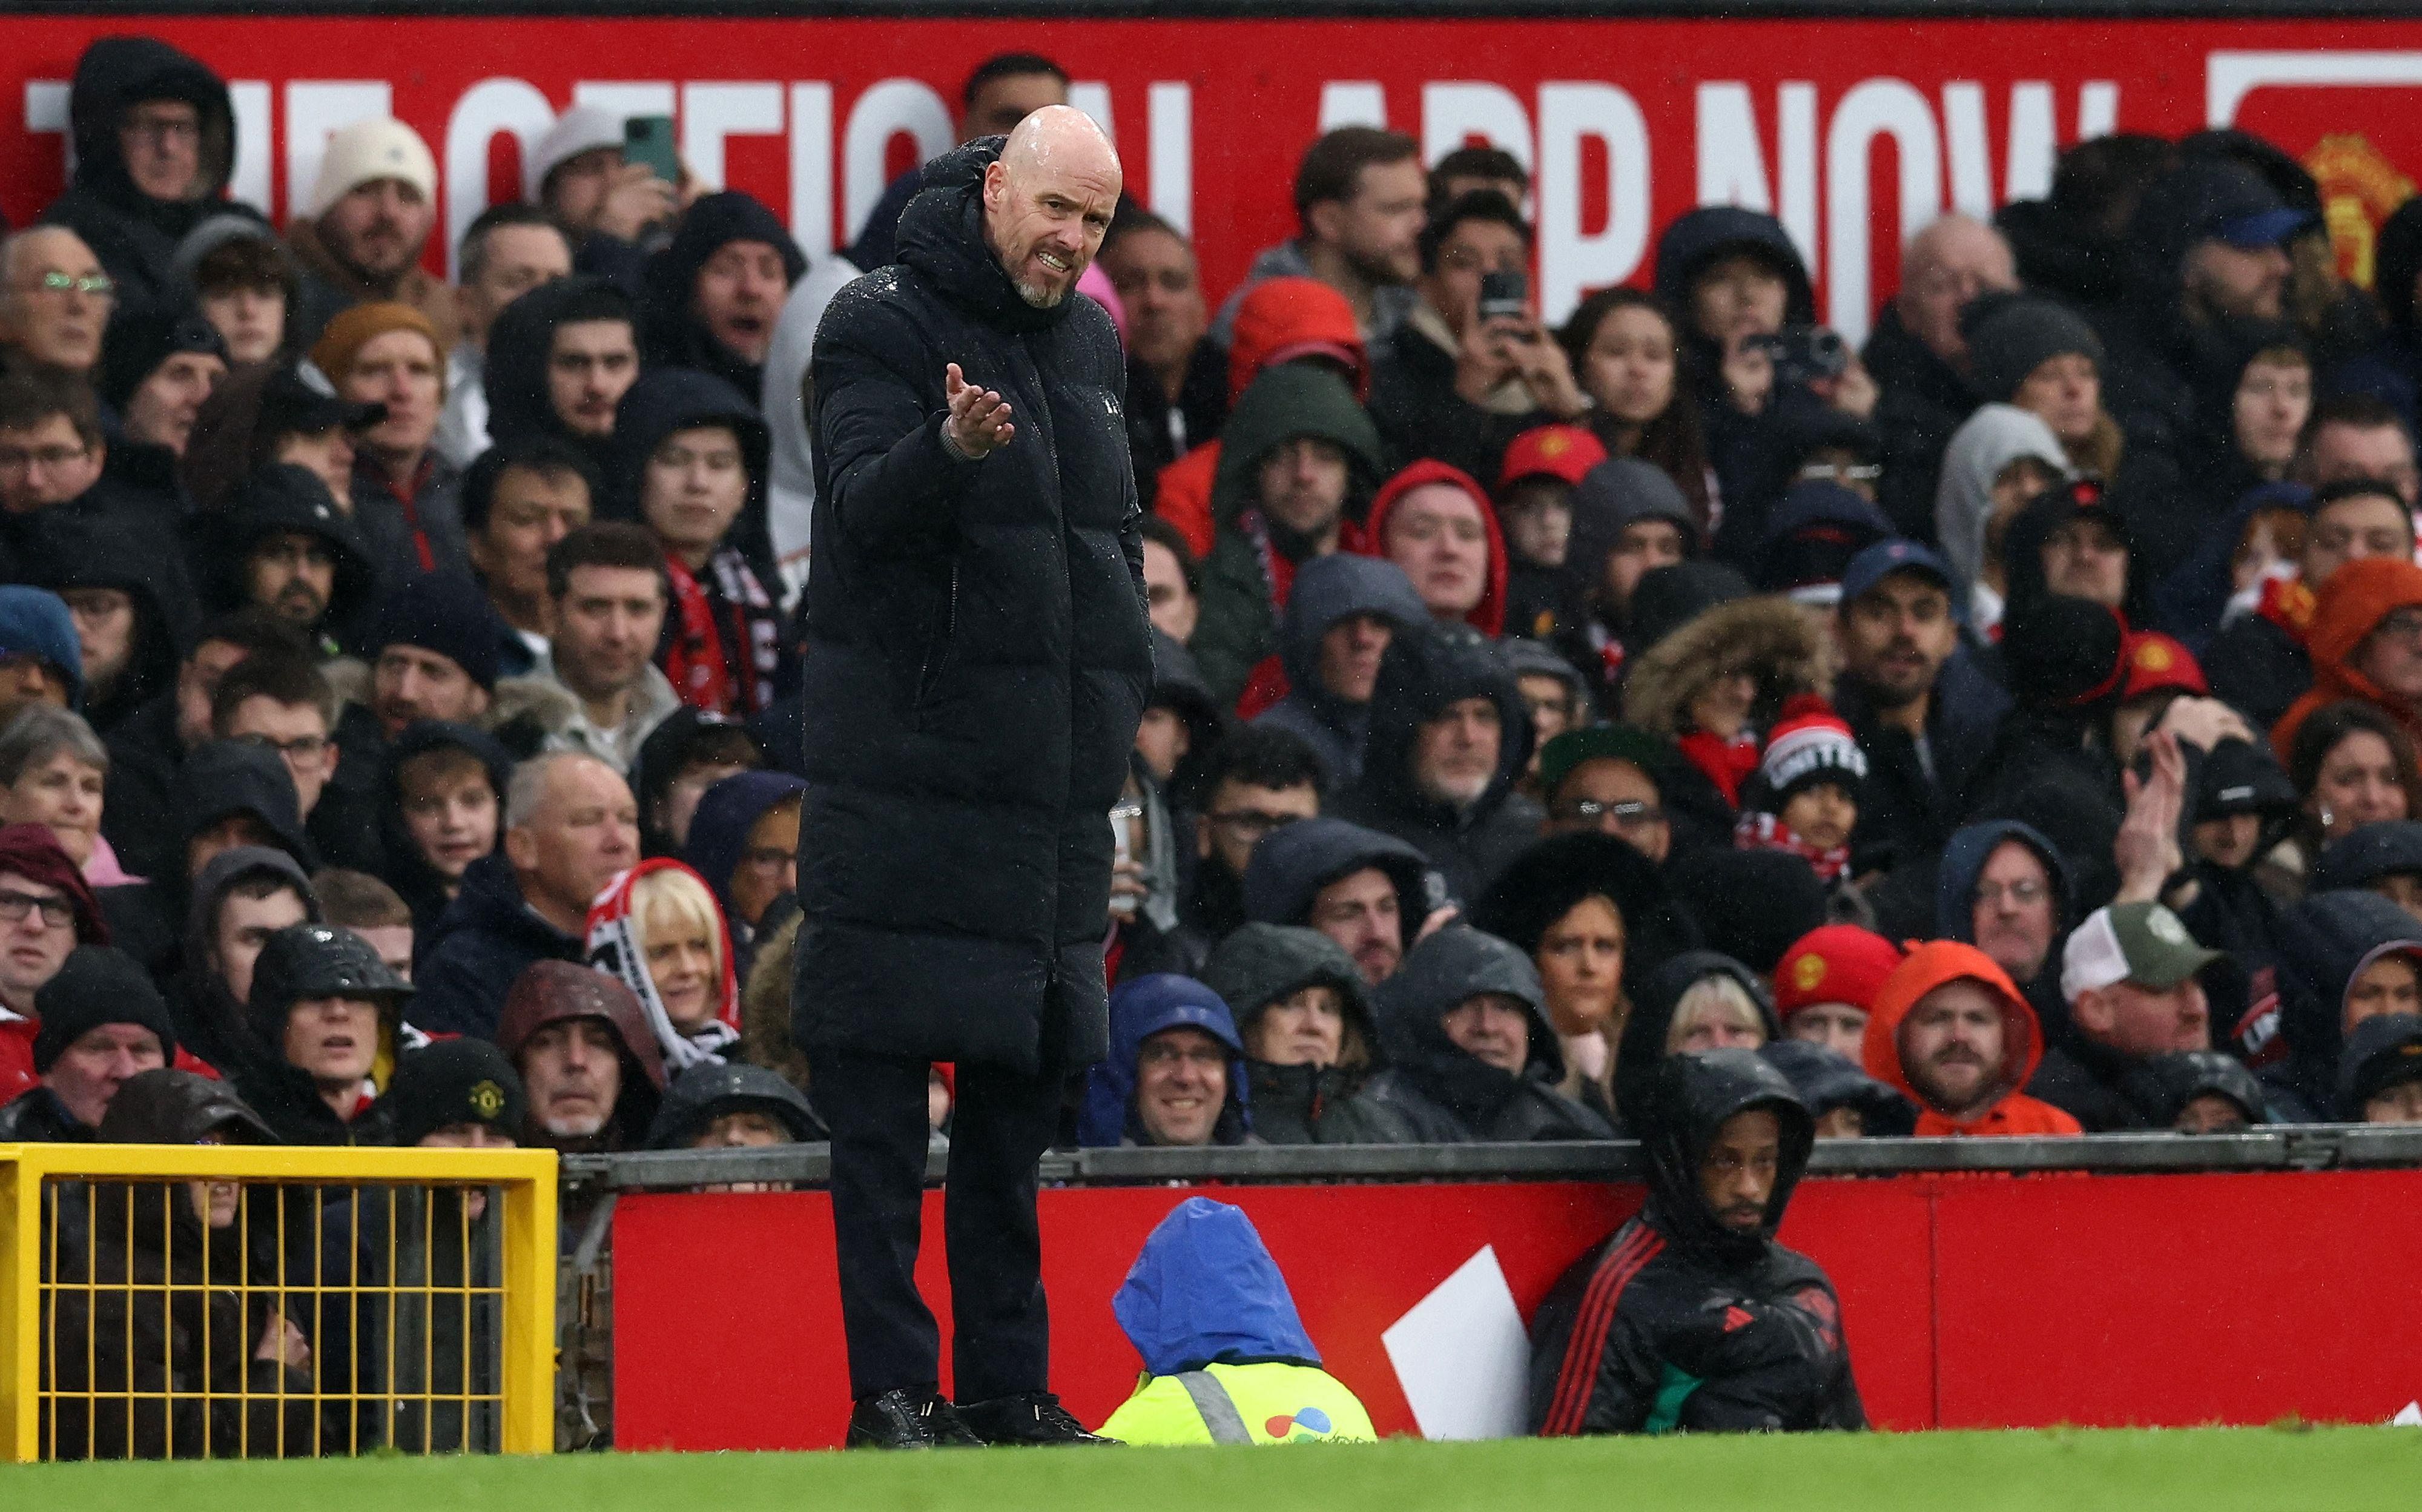 Man United boss Erik ten Hag calls for ‘spirit and passion’ ahead of FA Cup clash against Forest